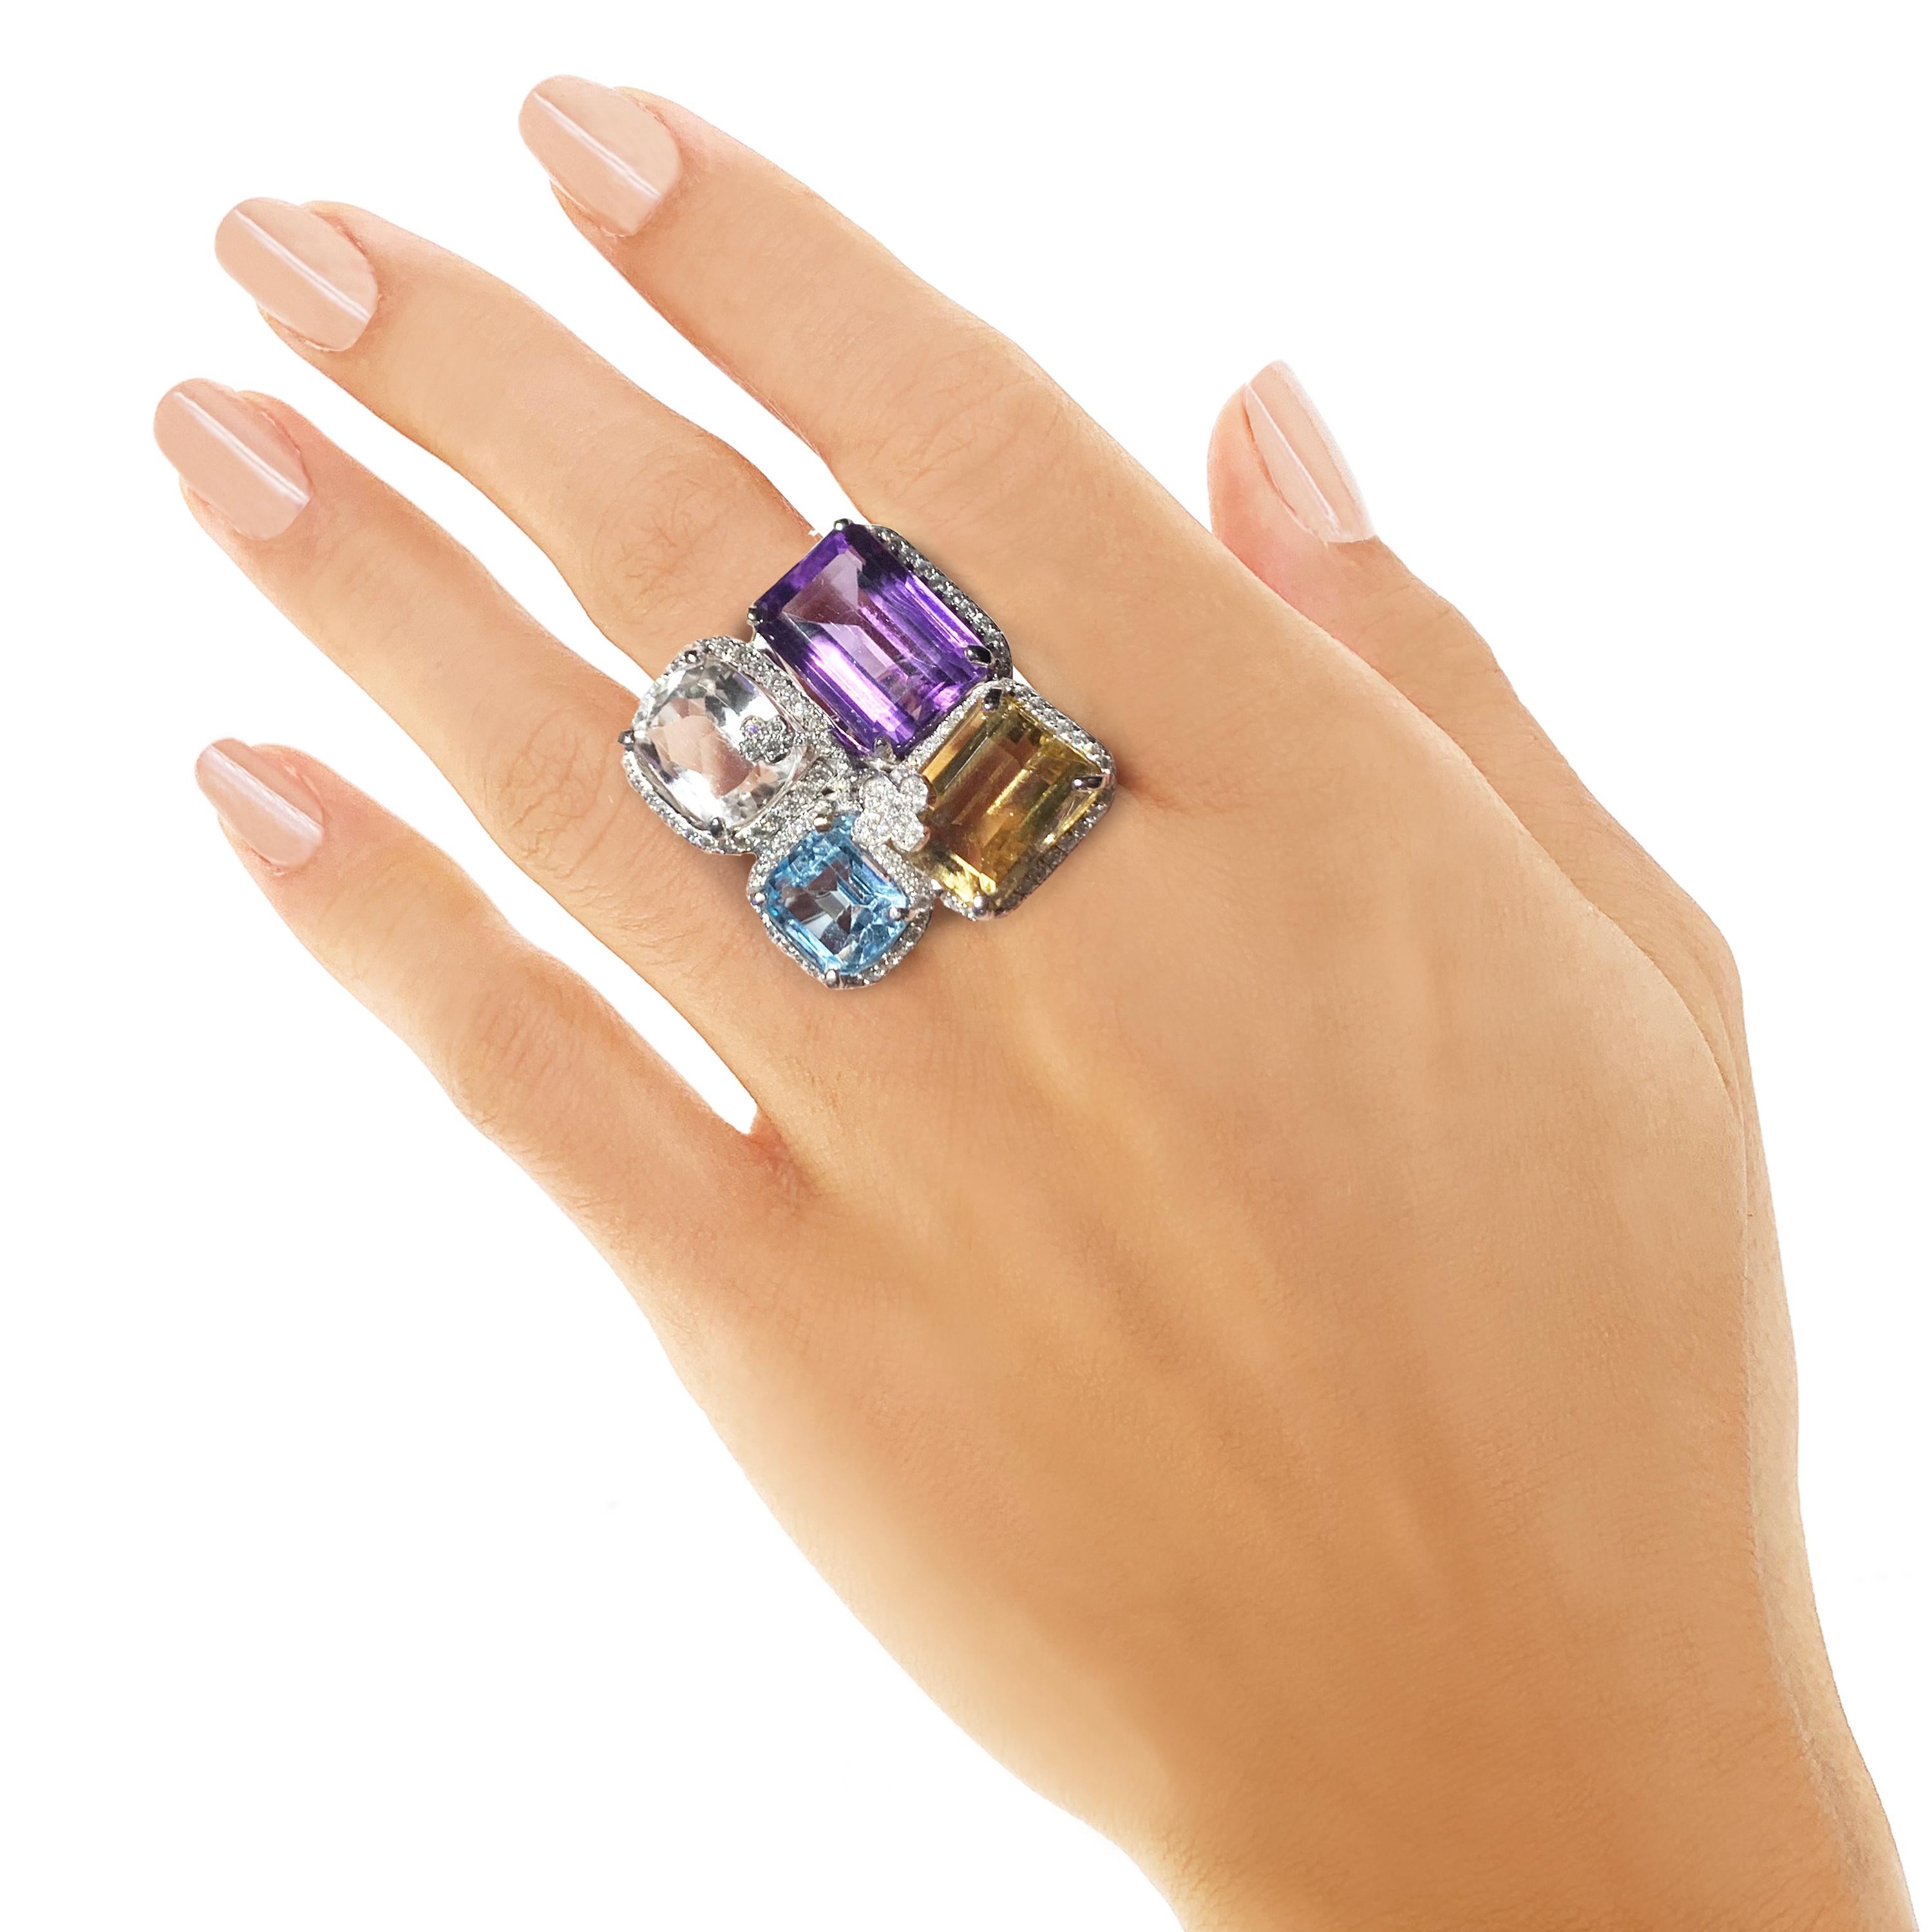 Rosior by Manuel Rosas Contemporary Cocktail Ring made in White Gold and set with:
- 1 Amethyst with 17,5 ct;
- 1 Citrine Topaz with 14,20 ct;
- 1 Kunzite with 10,10 ct;
- 1 Topaz with 7,50 ct;
- 134 G-VVS Diamonds with 2,16 ct.
This unique piece is